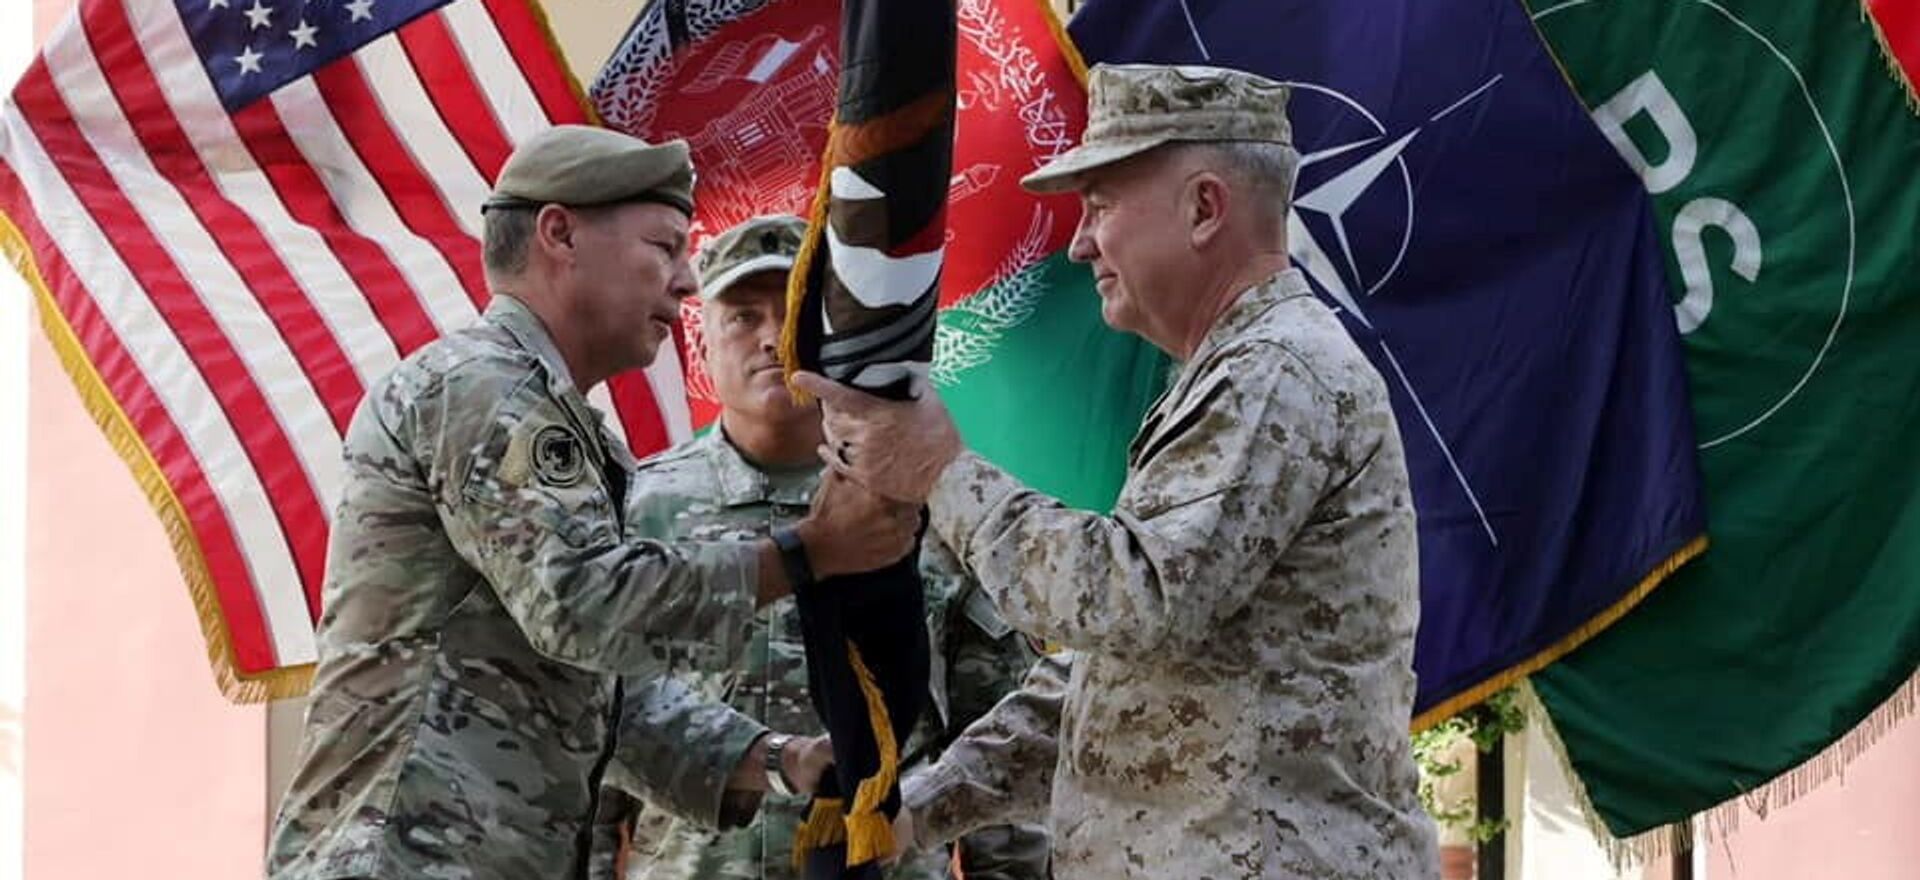 General Austin Scott Miller, commander of U.S. forces and NATO's Resolute Support Mission, hands over his command to U.S. Marine General Kenneth McKenzie, during a ceremony in Kabul, Afghanistan July 12, 2021 - Sputnik International, 1920, 15.08.2021